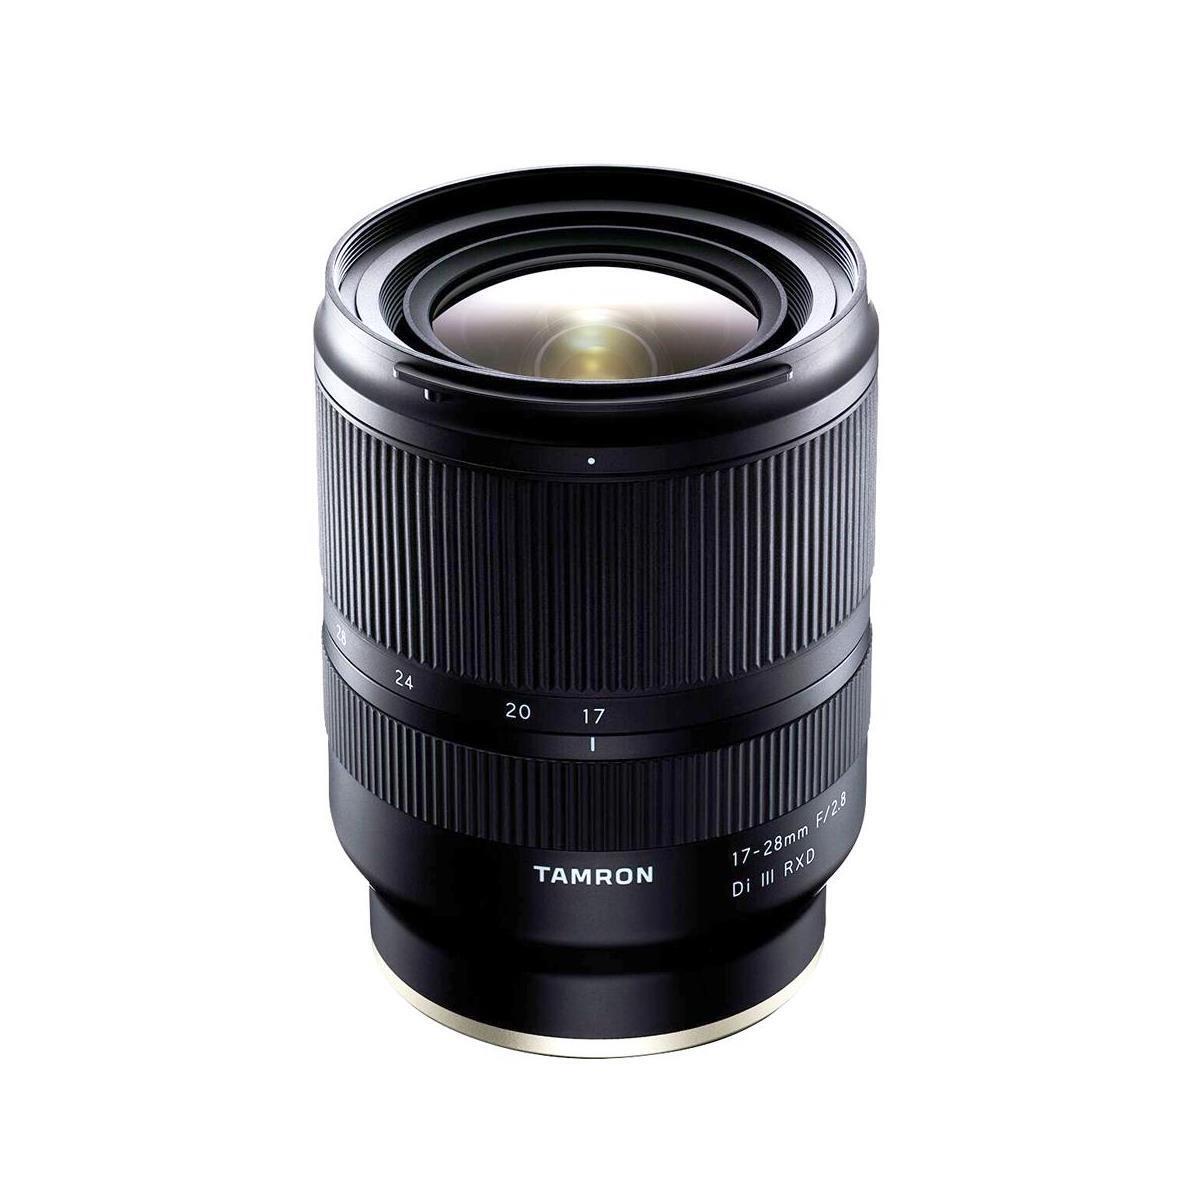 Tamron 17-28mm f/2.8 Di III RXD Lens for Sony E #AFA046S-700